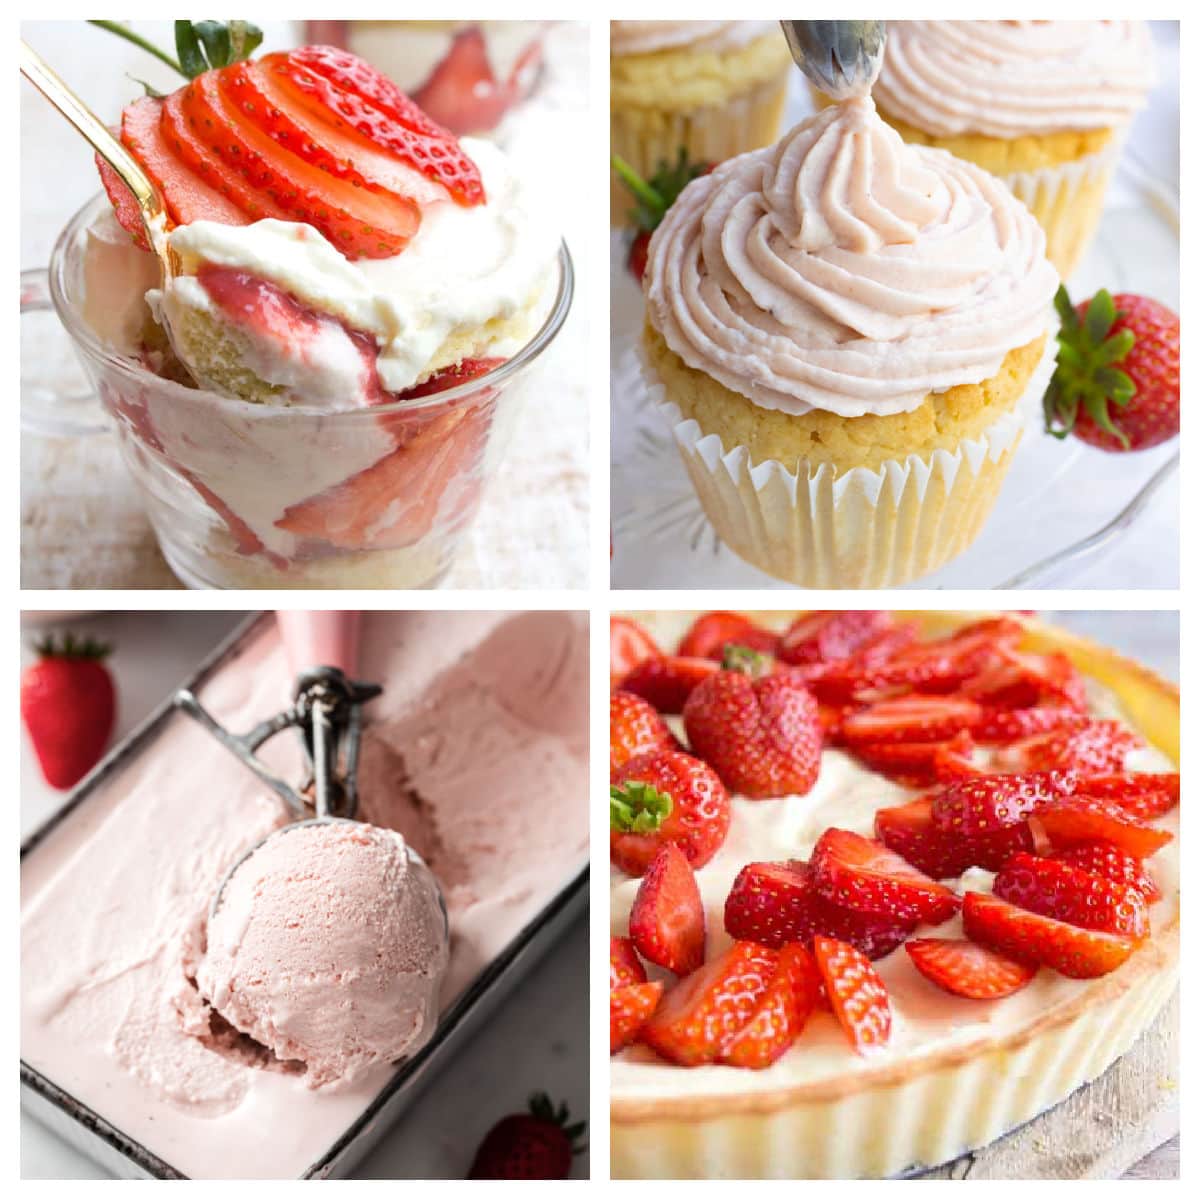 A grid with strawberry ice cream, strawberry tart, strawberry icing and strawberry shortcake.